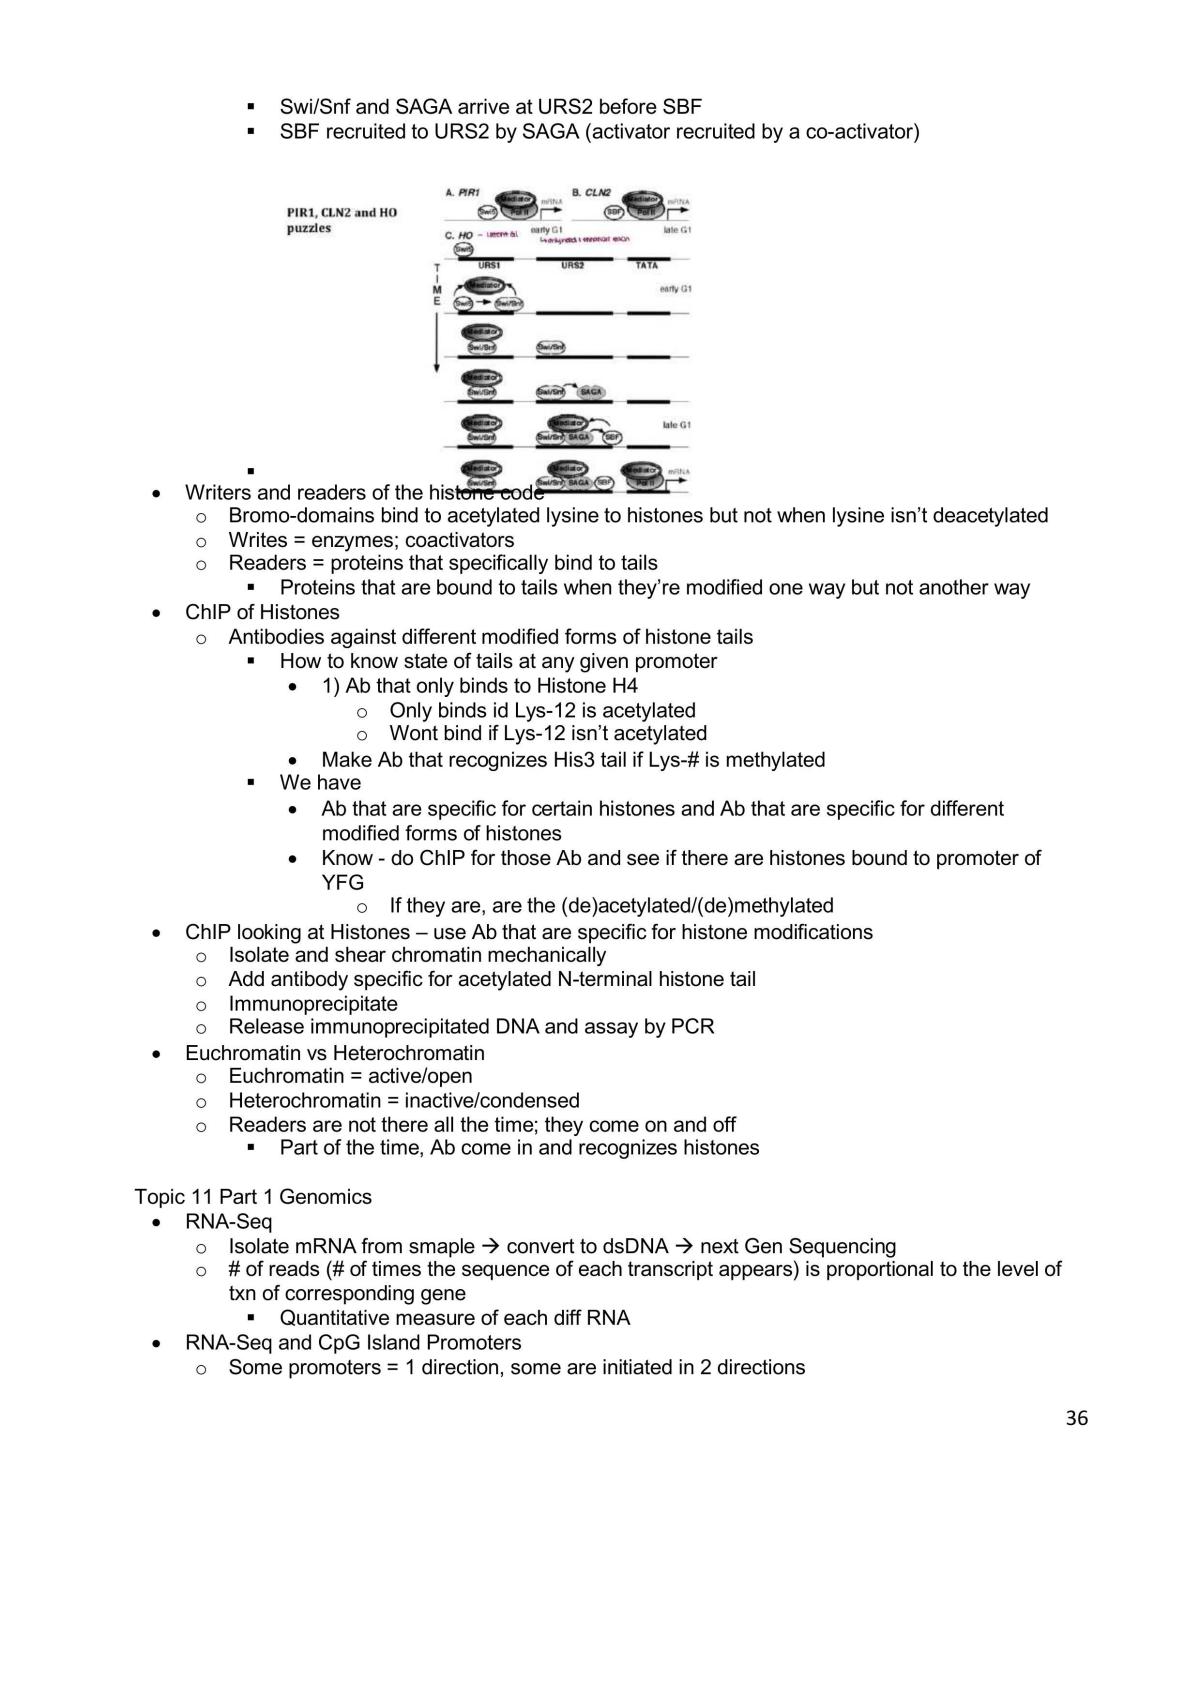 Genetics and Genomics Final Study Guide - Page 36